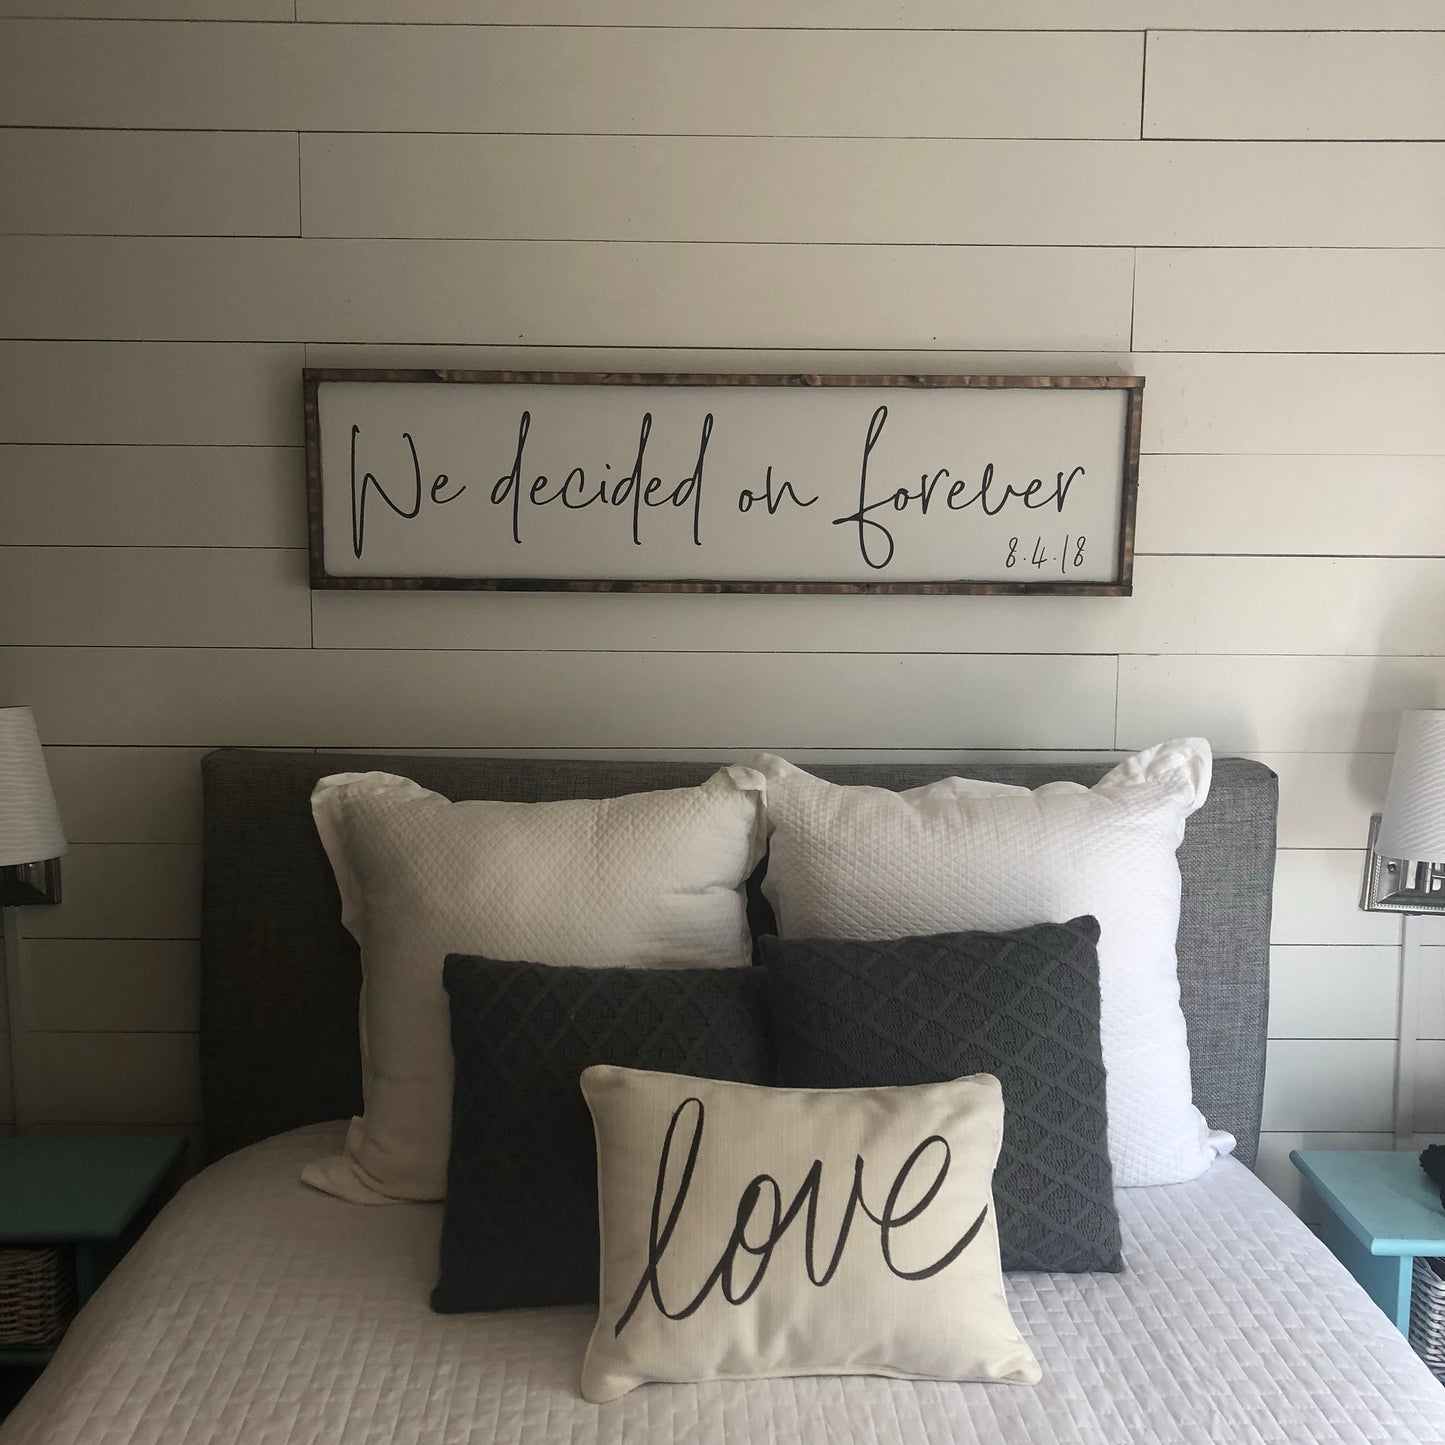 we decided on forever 2.0 - above over the bed sign - master bedroom wall art - personalized wedding gift [FREE SHIPPING!]